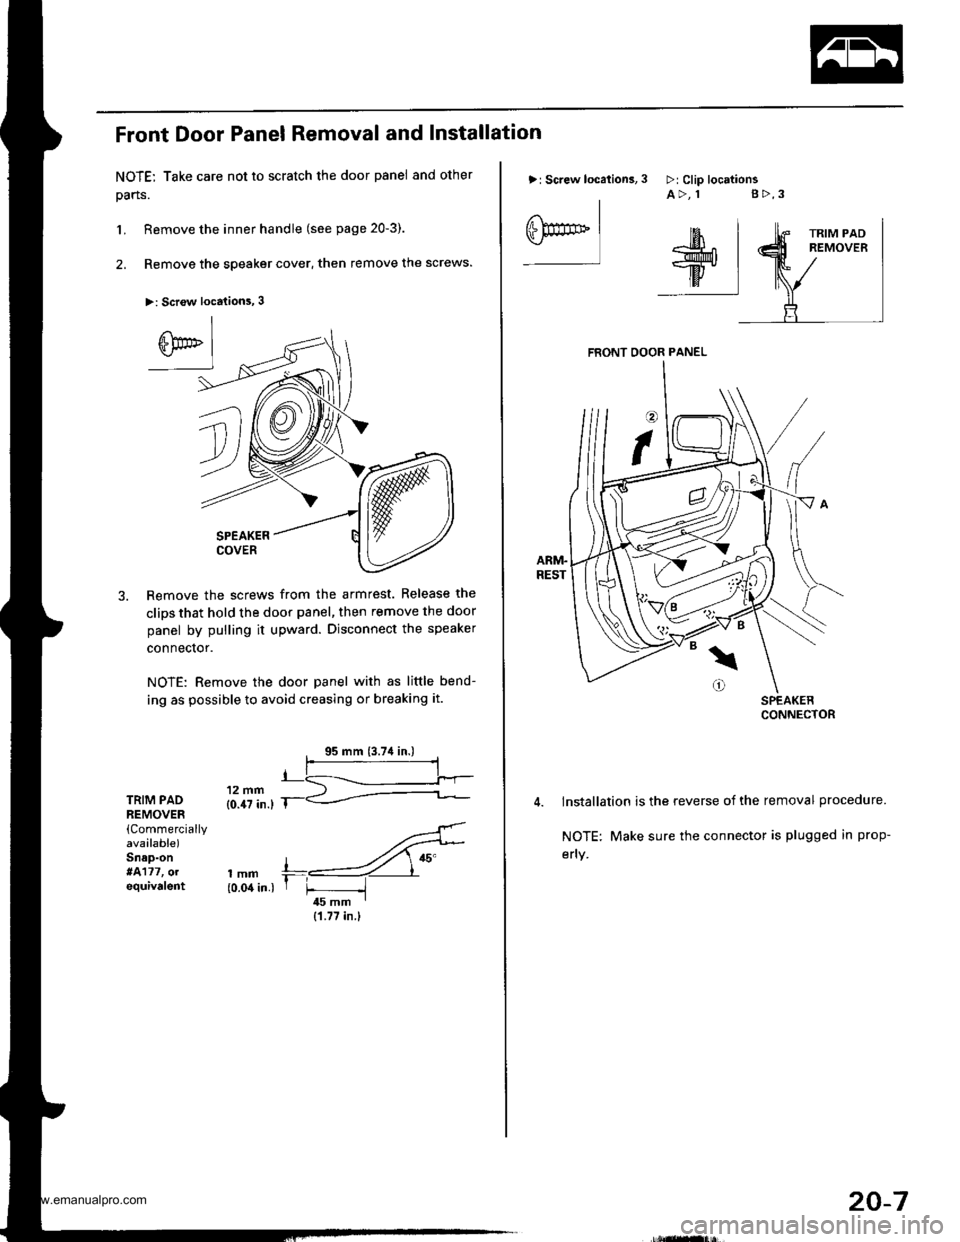 HONDA CR-V 1999 RD1-RD3 / 1.G Workshop Manual 
Front Door Panel Removal and Installation
NOTE: Take care not to scratch the door panel and other
pans.
L Remove the inner handle (see page 20-3).
2. Remove the speaker cover, then remove the screws.